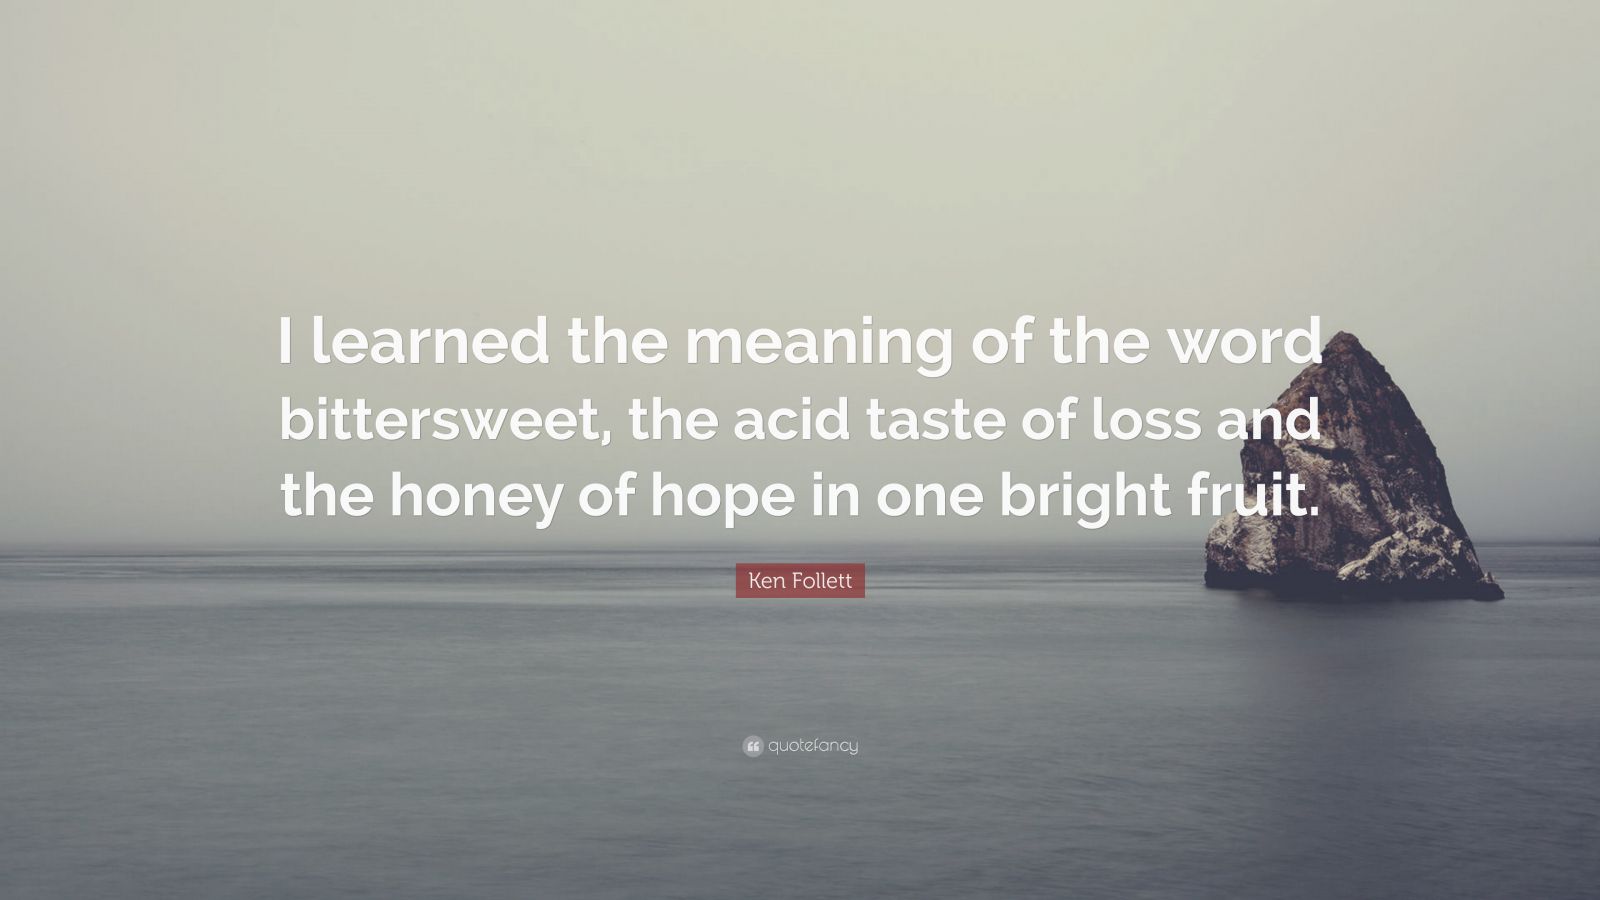 Ken Follett Quote I Learned The Meaning Of The Word Bittersweet The Acid Taste Of Loss And The Honey Of Hope In One Bright Fruit